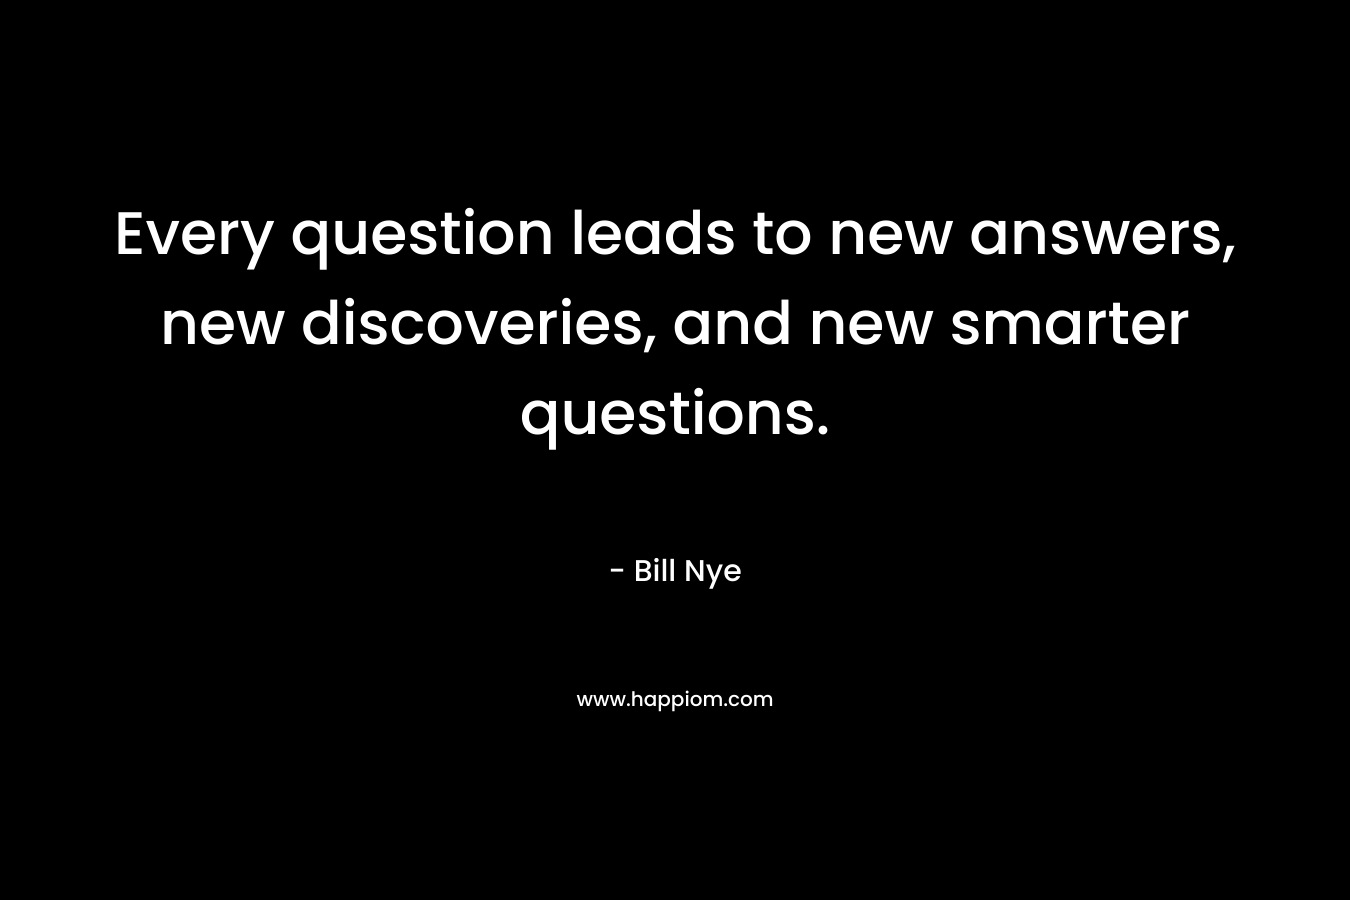 Every question leads to new answers, new discoveries, and new smarter questions. – Bill Nye